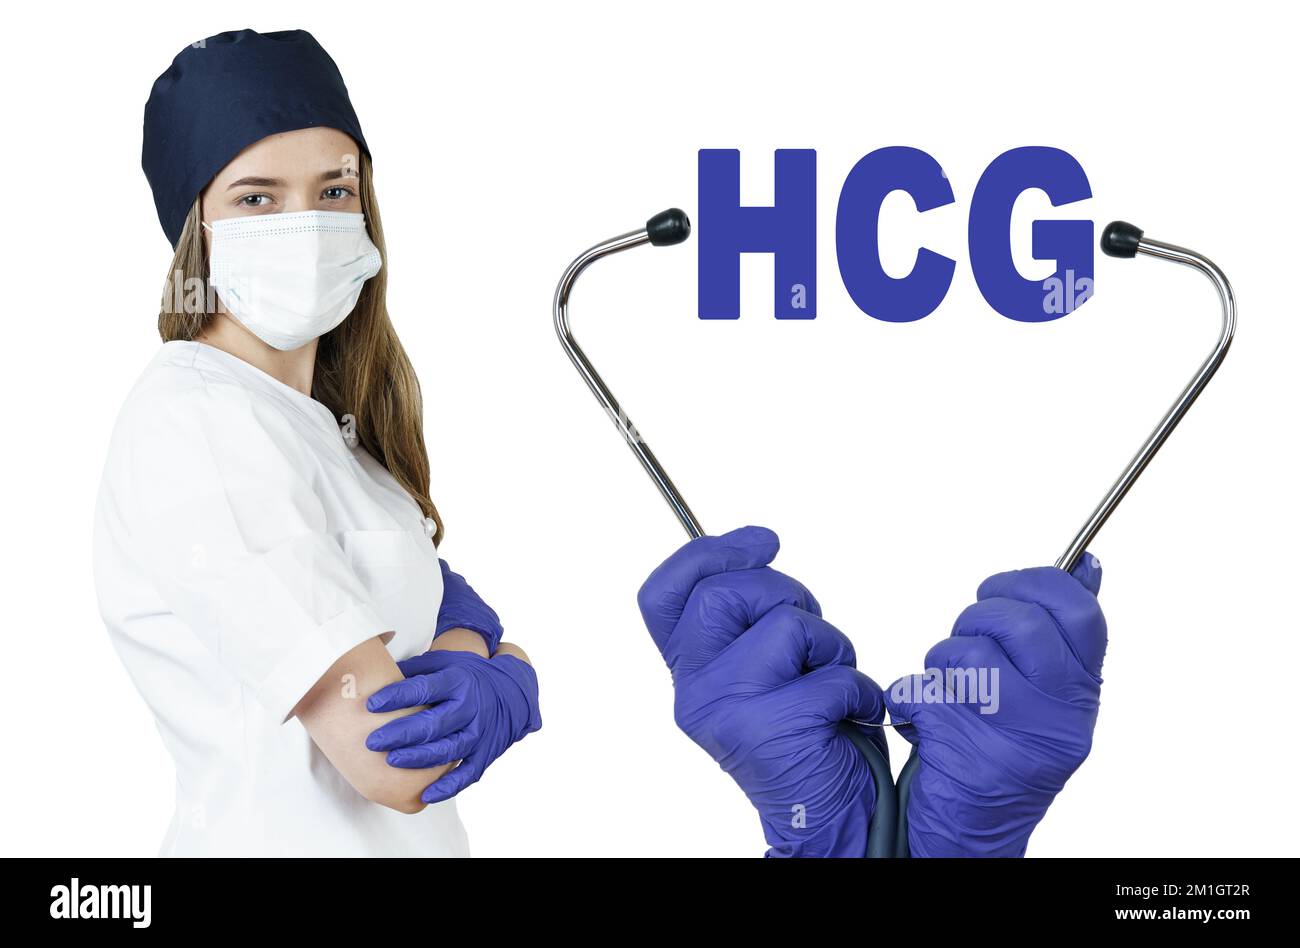 Health care and medicine concept. The doctor is holding a stethoscope, in the middle there is a text - HCG. Human Chorionic Gonadotropin Stock Photo